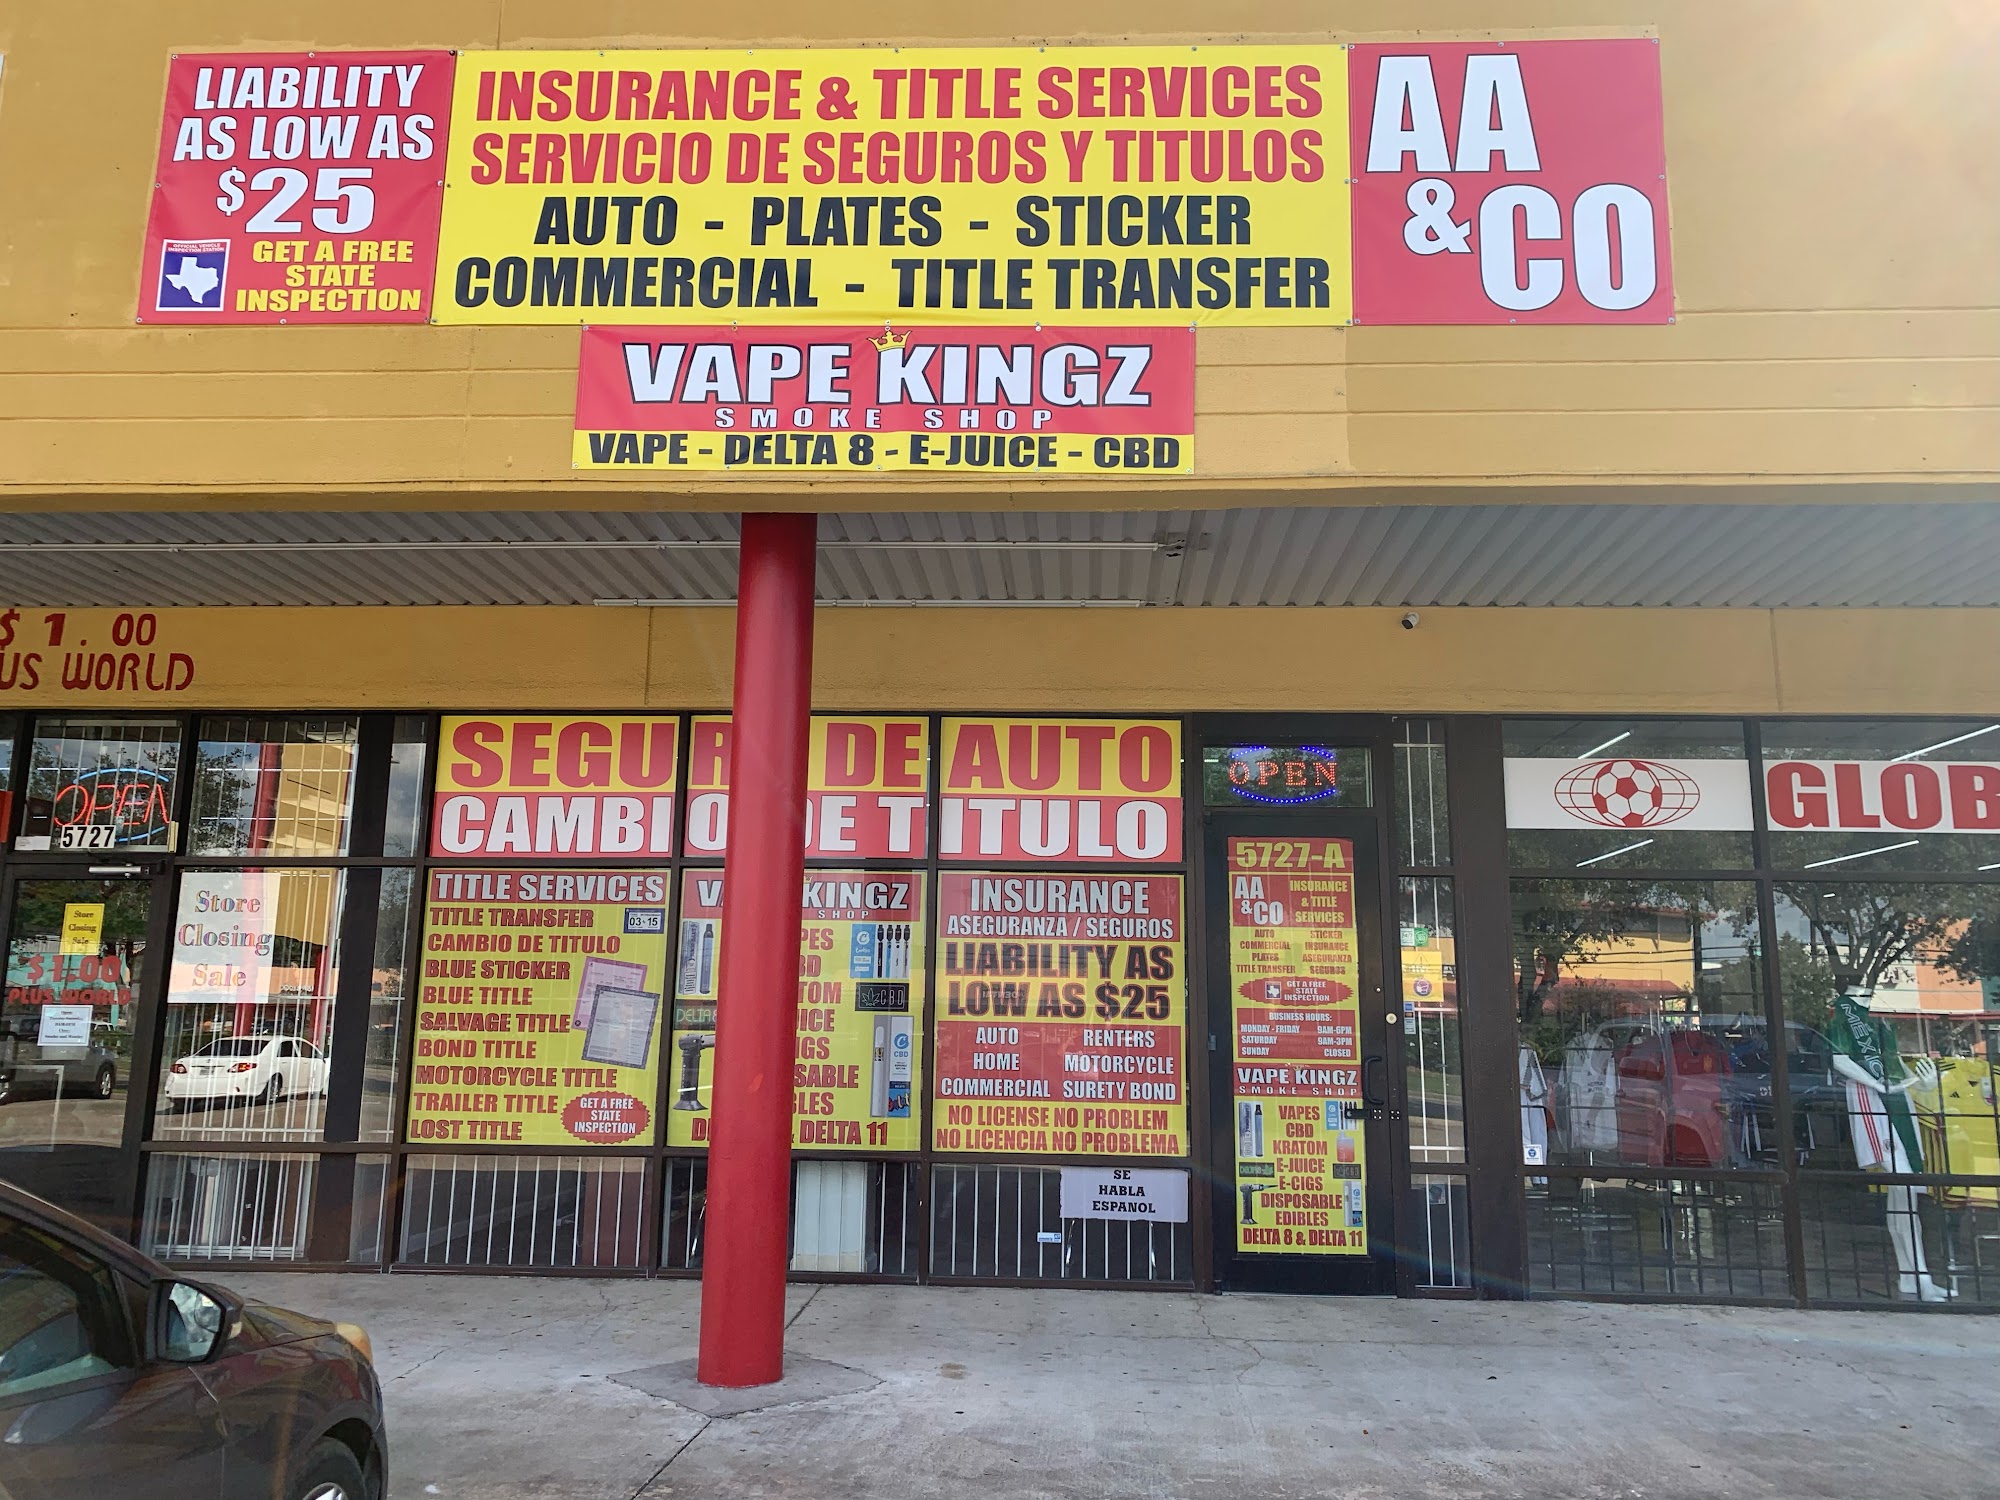 AA CO INSURANCE AND TITLE SERVICES